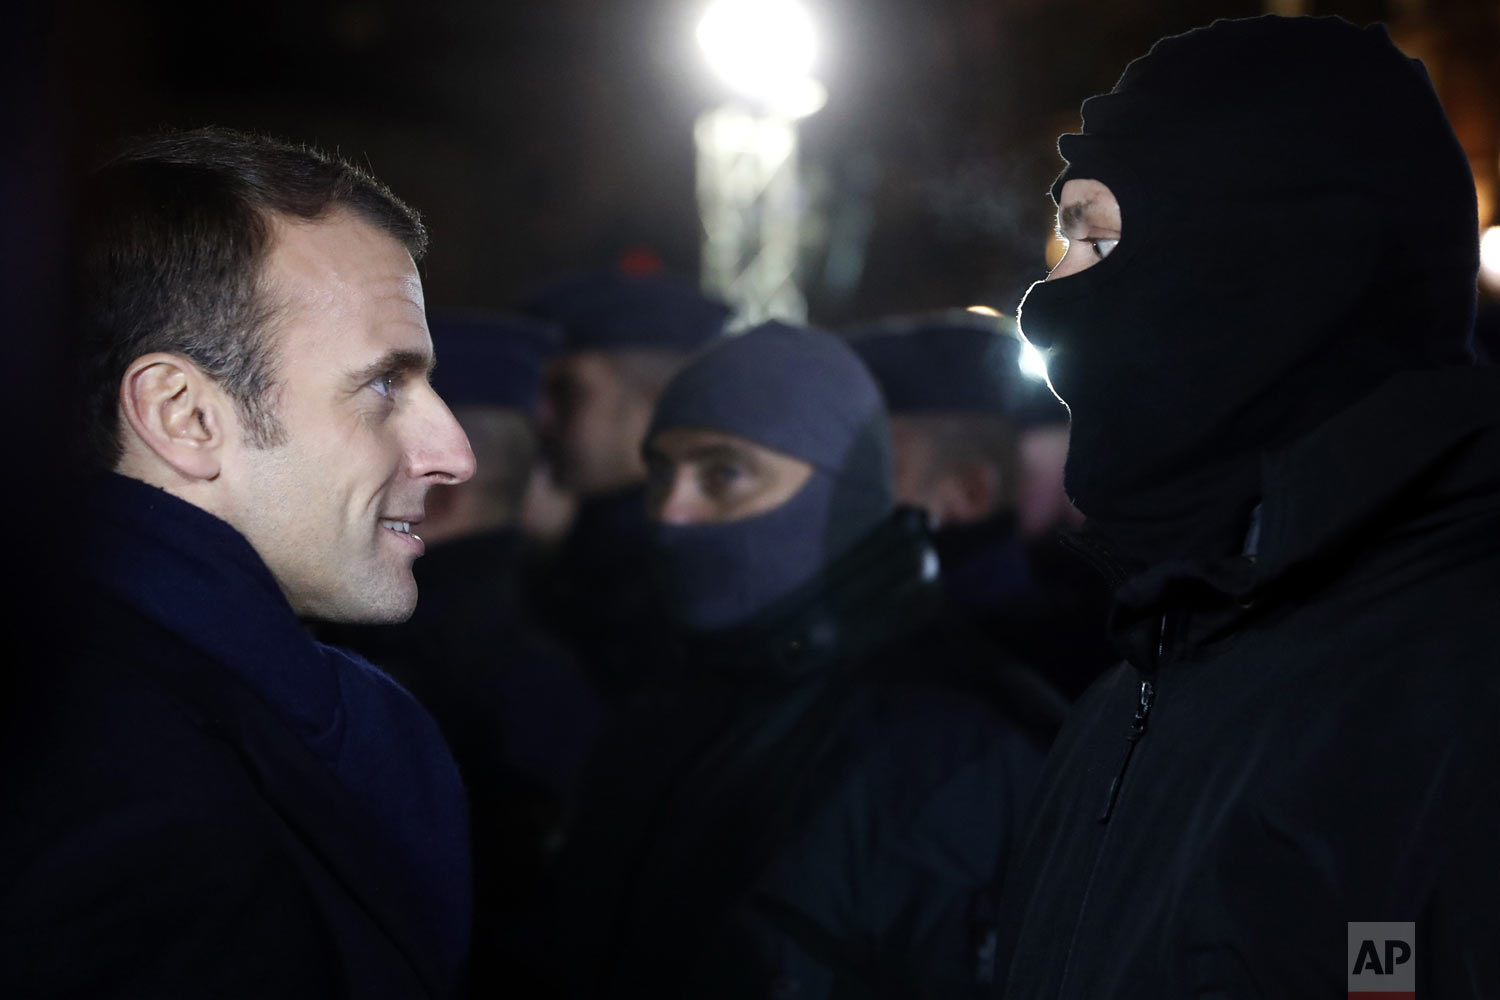  French President Emmanuel Macron meets police officers wearing hoods near the Christmas market in Strasbourg, eastern France, Friday, Dec.14, 2018. A fourth person died Friday from wounds suffered in an attack on the Christmas market in Strasbourg, 